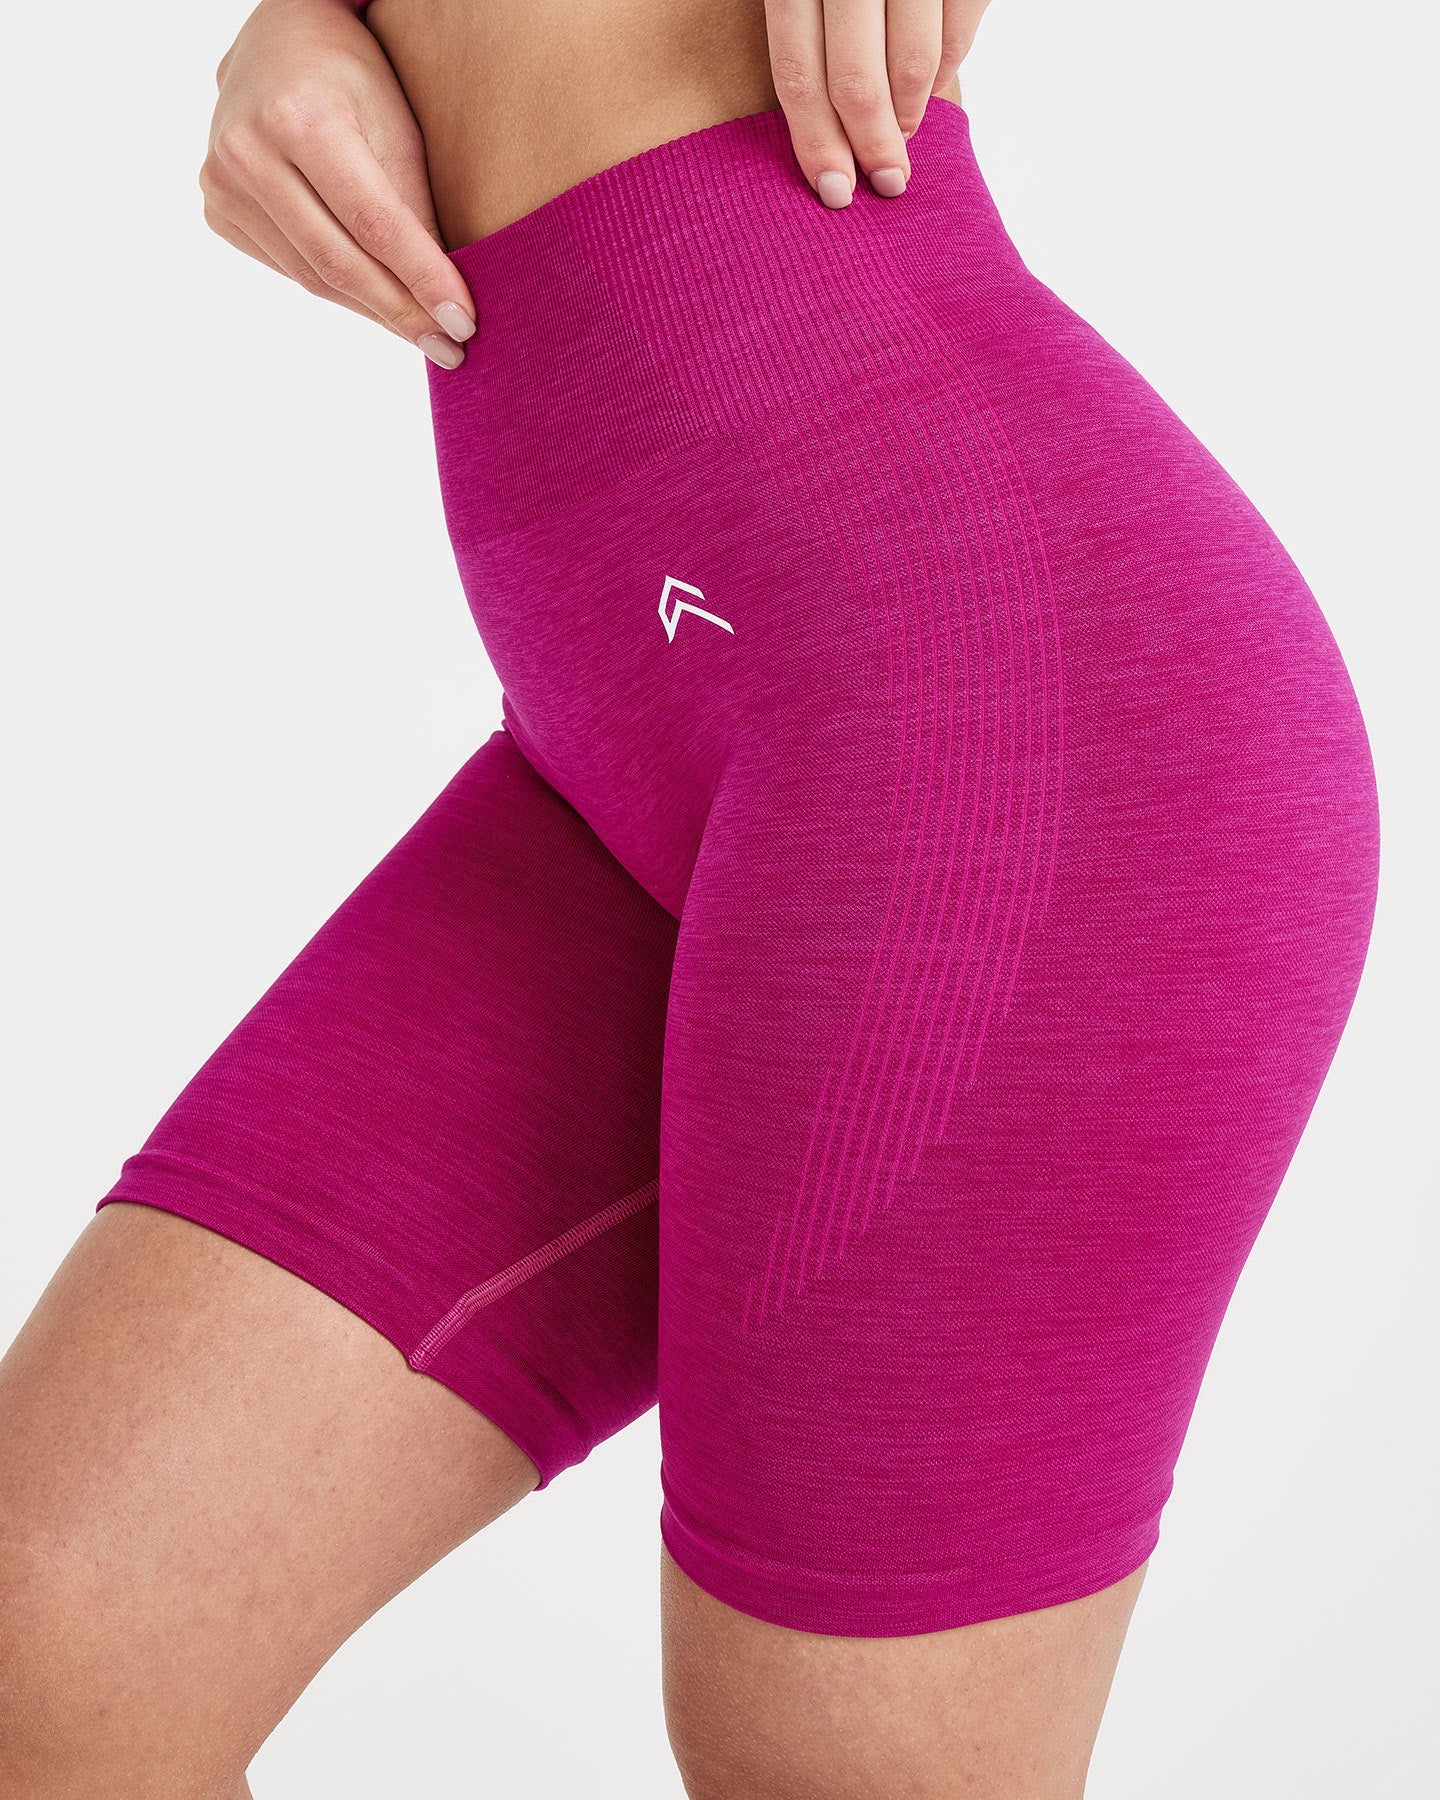 Pink Solid Color Biker Shorts, Pastel Light Pink Premium Women's Cycling  Shorts-Made in EU/MX